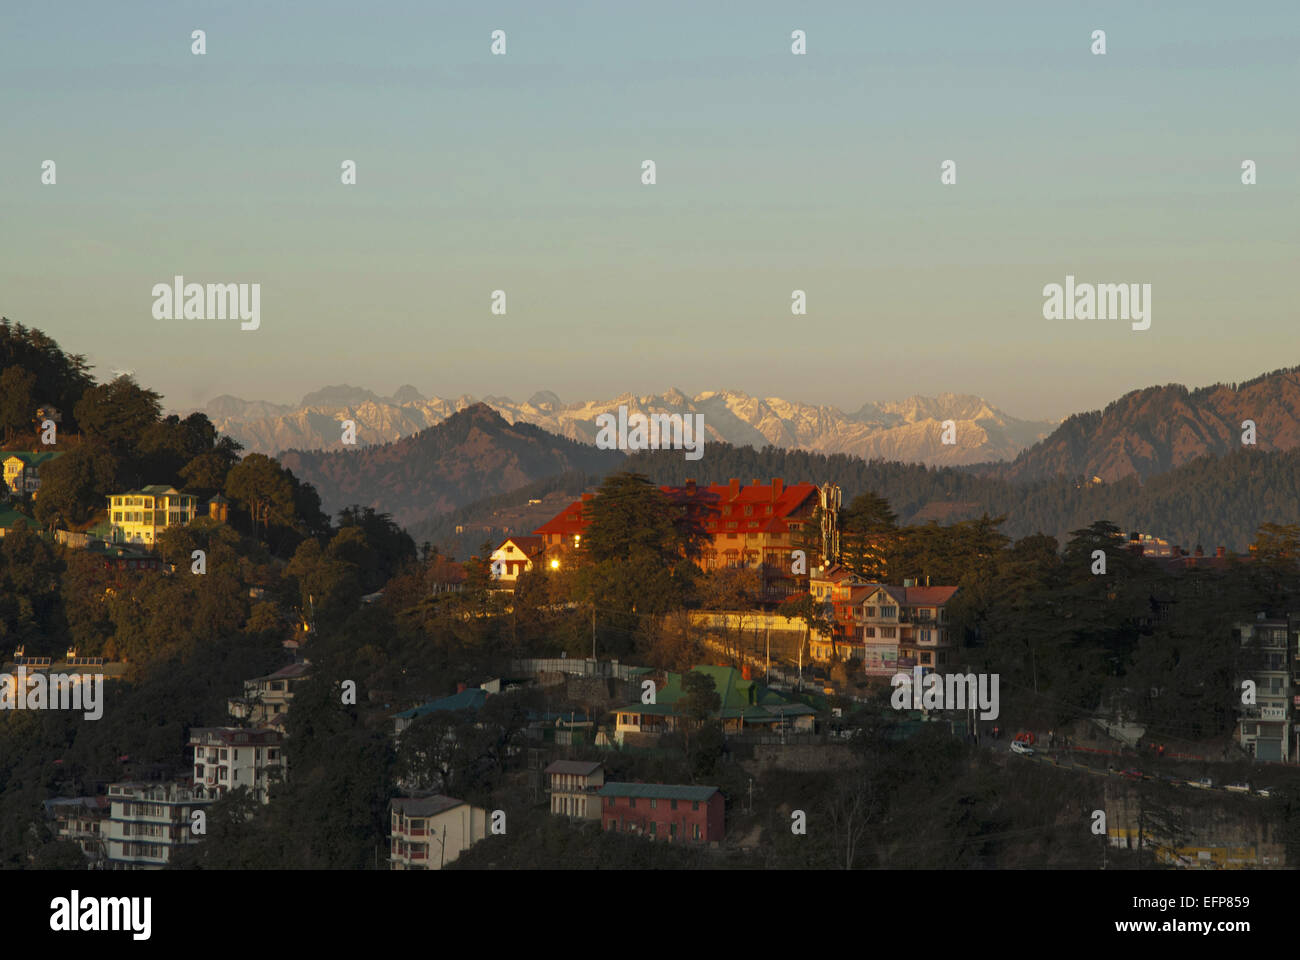 General-View showing houses and hilltops at the far end. Shimla Himachal Pradesh, India Stock Photo